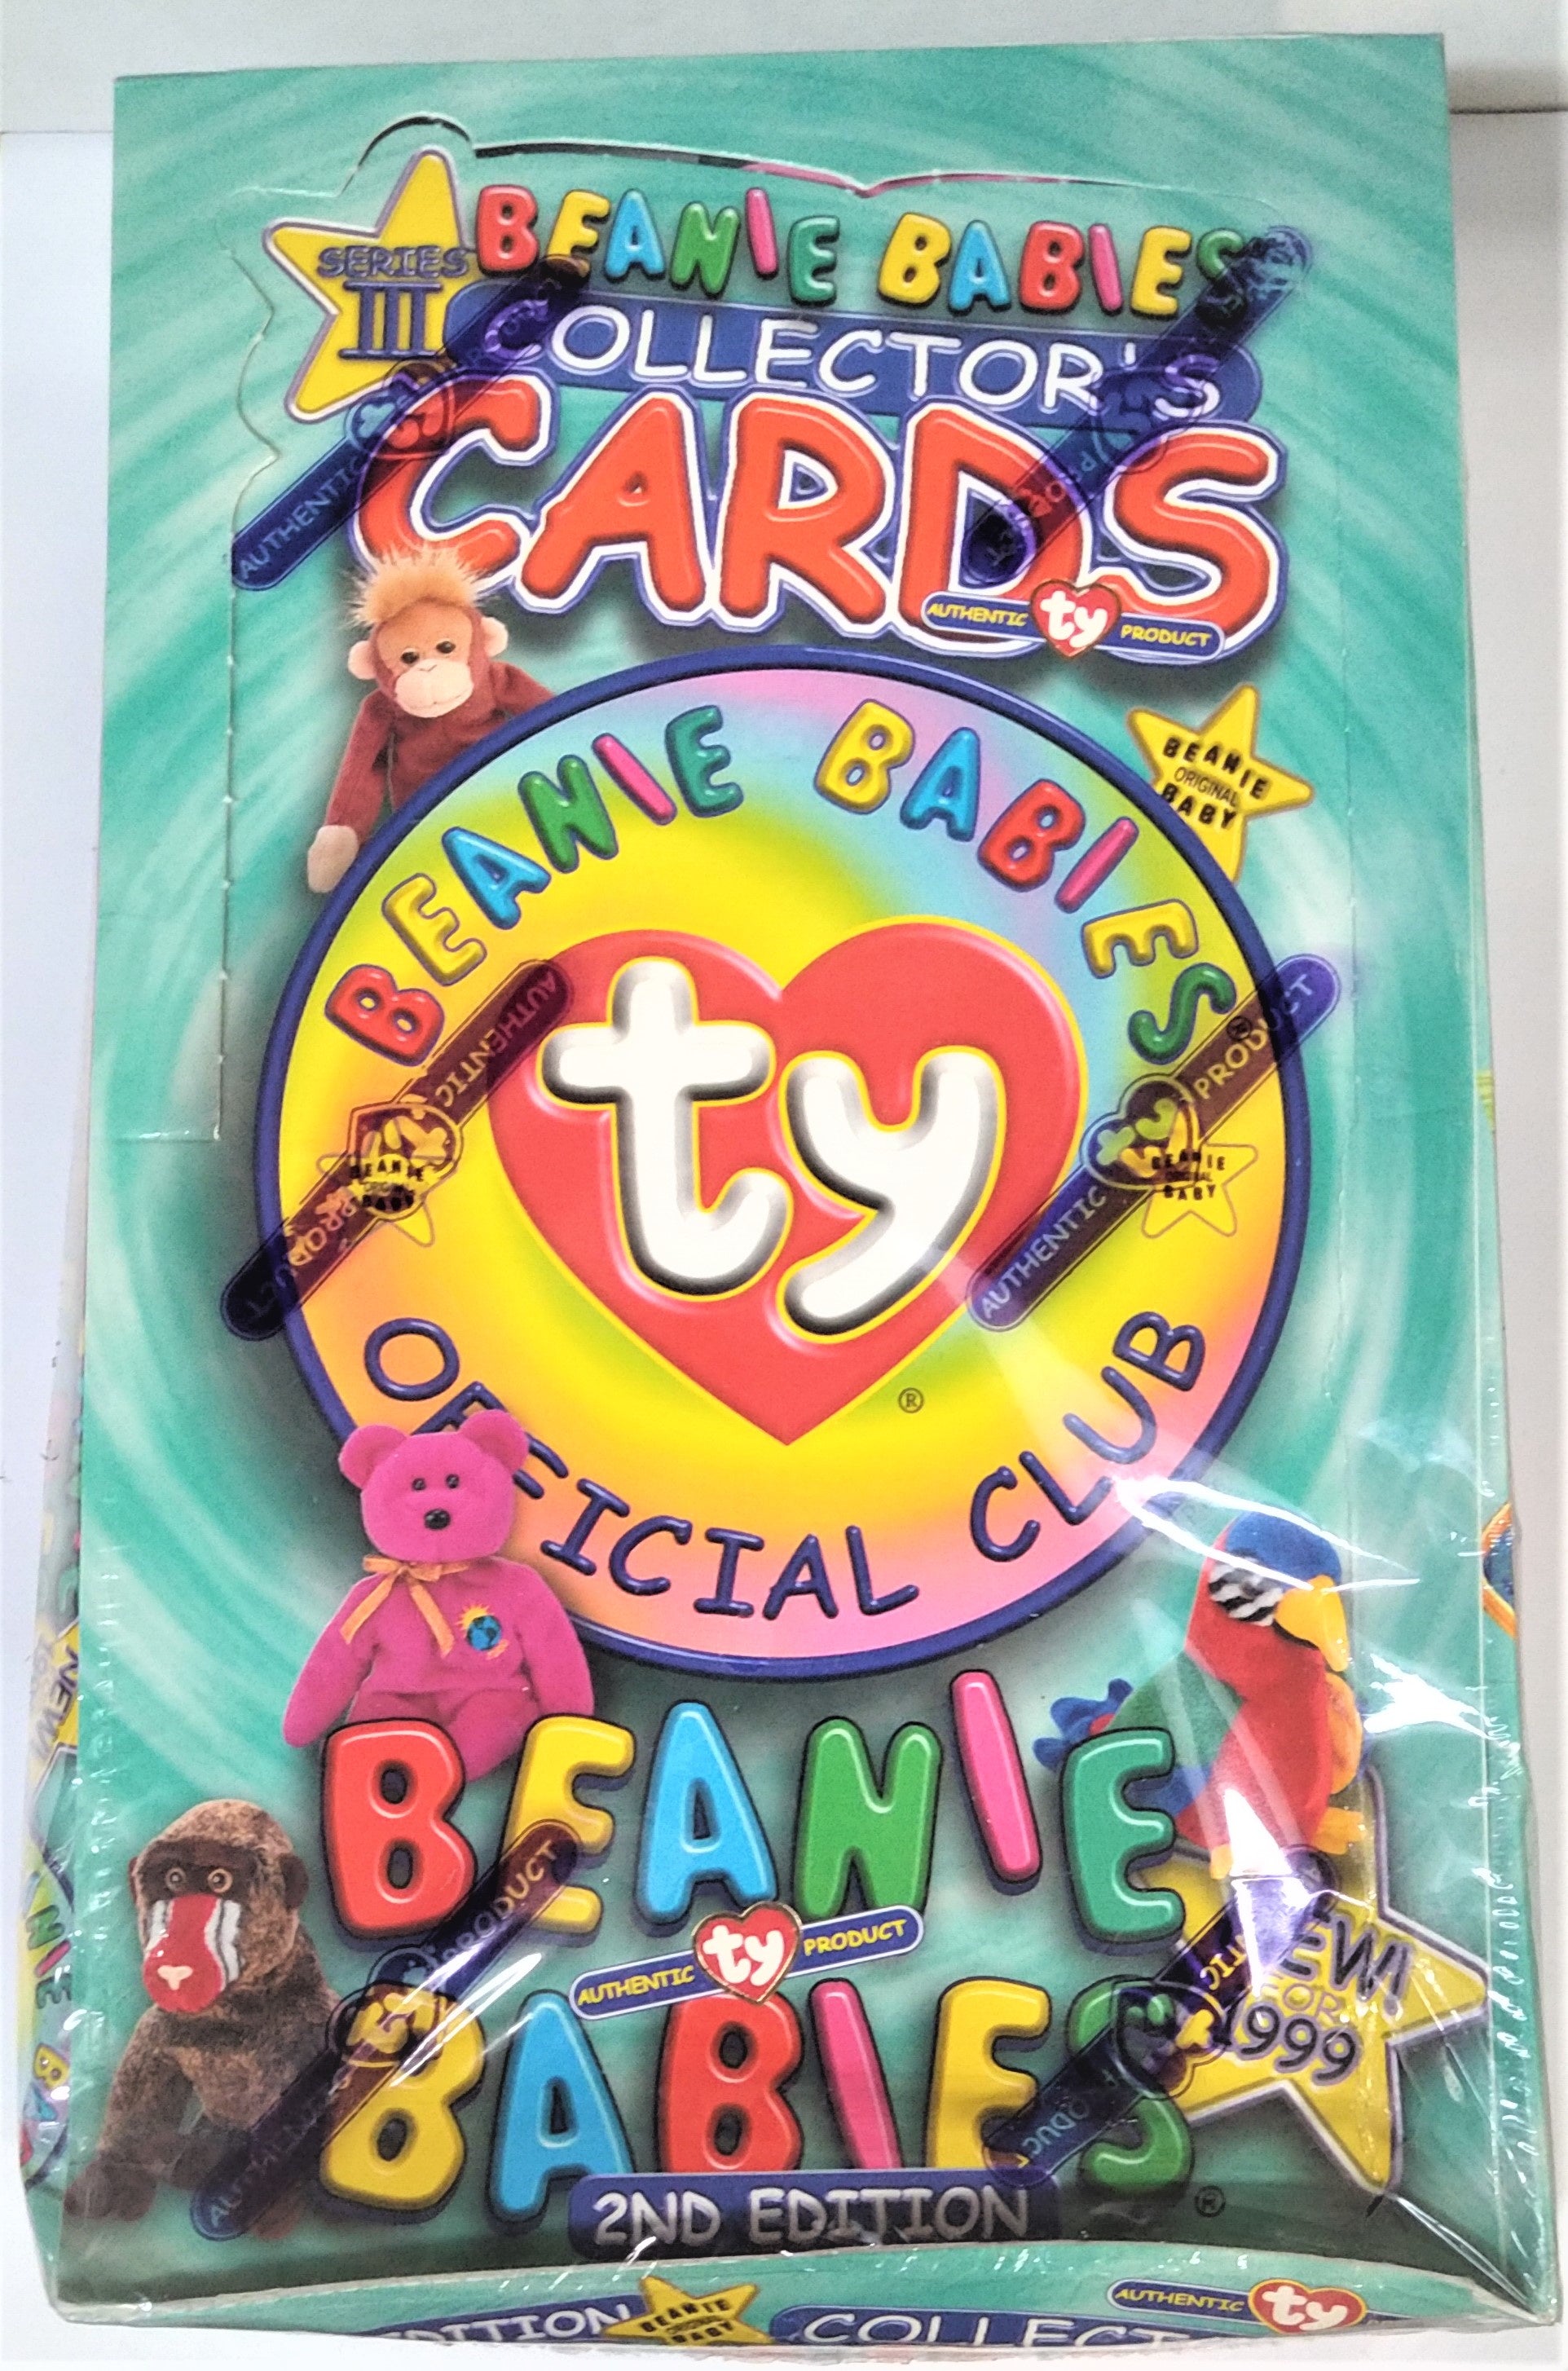 1999 Ty Beanie Babies Collector Cards Series 3 2nd Edition Box - BigBoi Cards